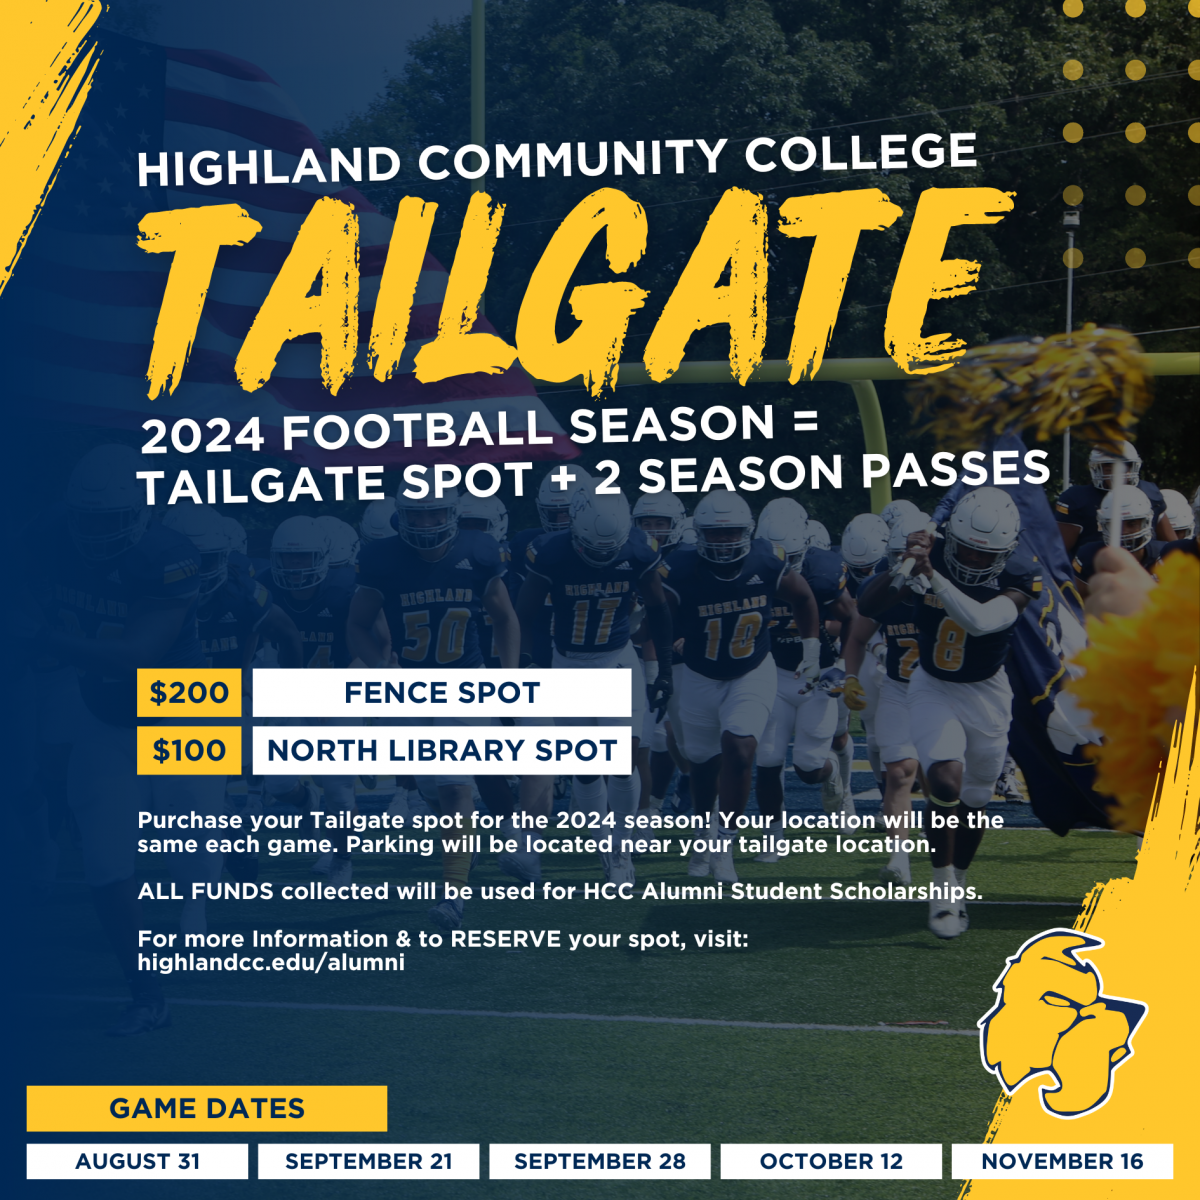 2024 Tailgate Information